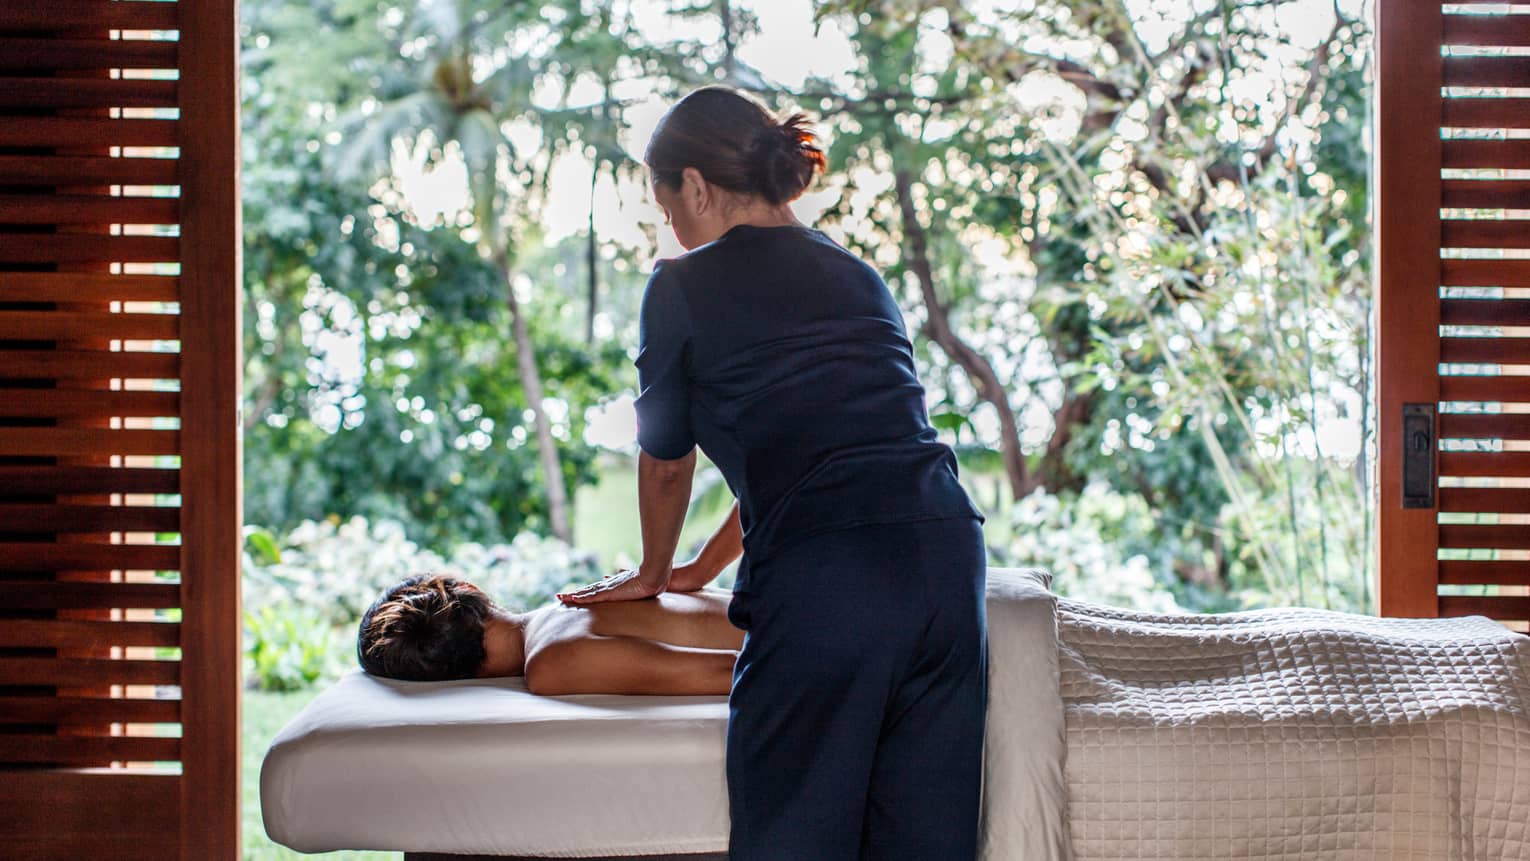 Spa staff massages woman's bare shoulders as she lies under sheet on massage table